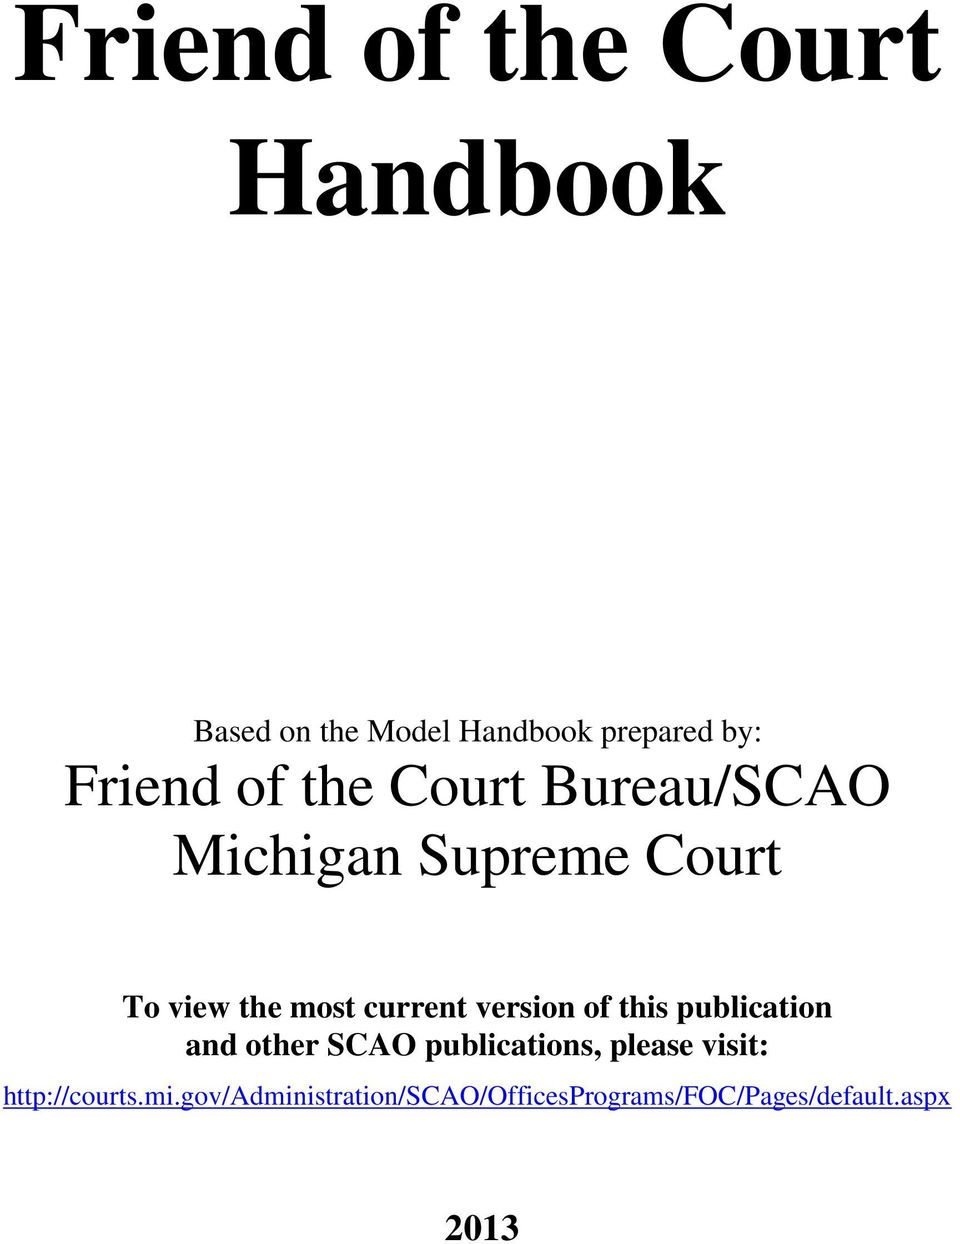 version of this publication and other SCAO publications, please visit: